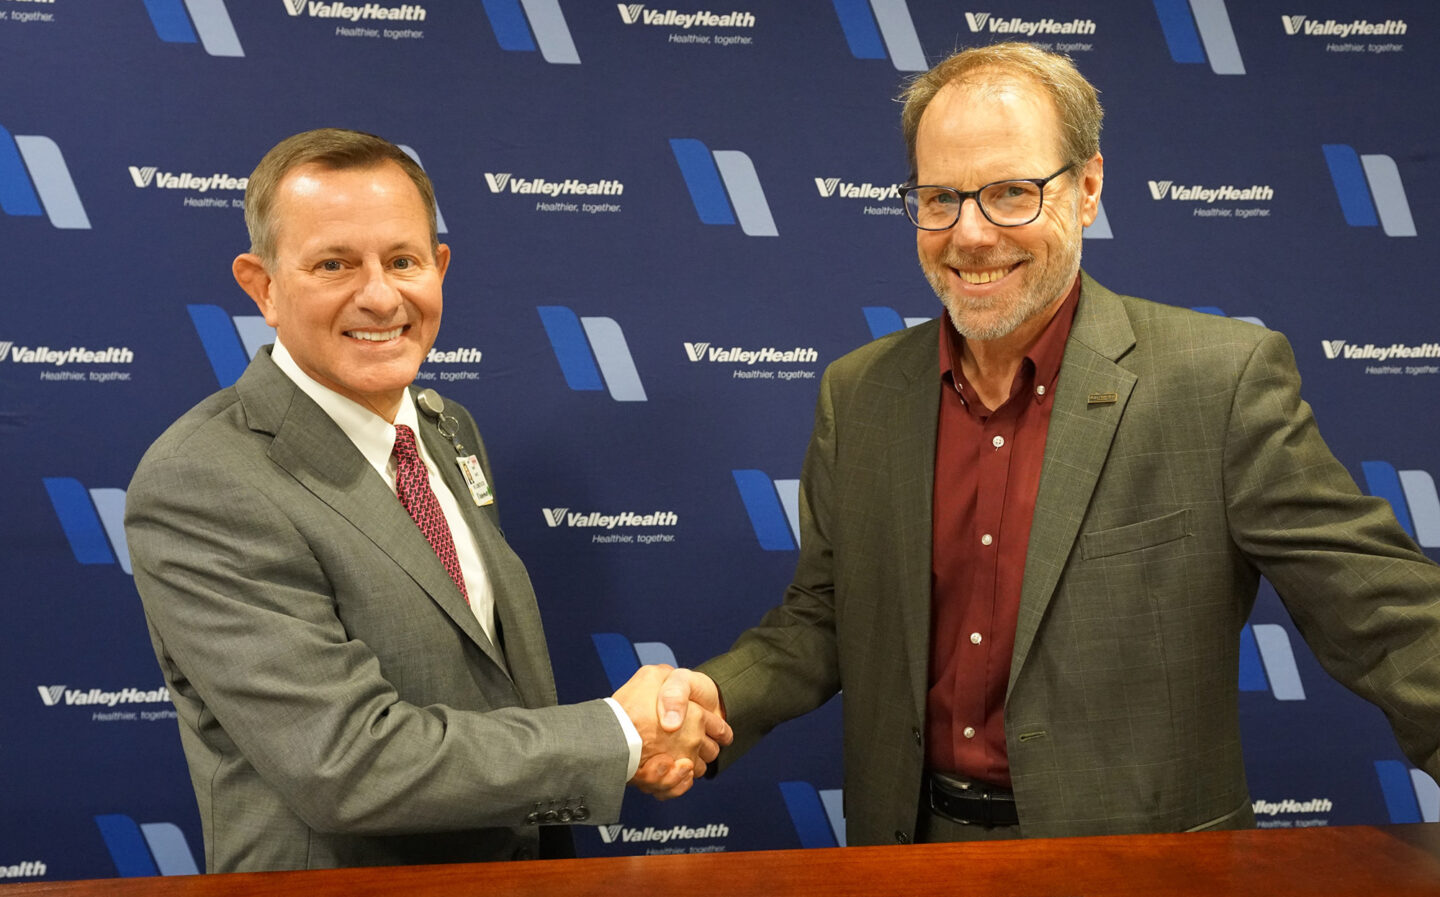 Leaders from Mary Free Bed and Valley Health Sign Joint Operating Agreement